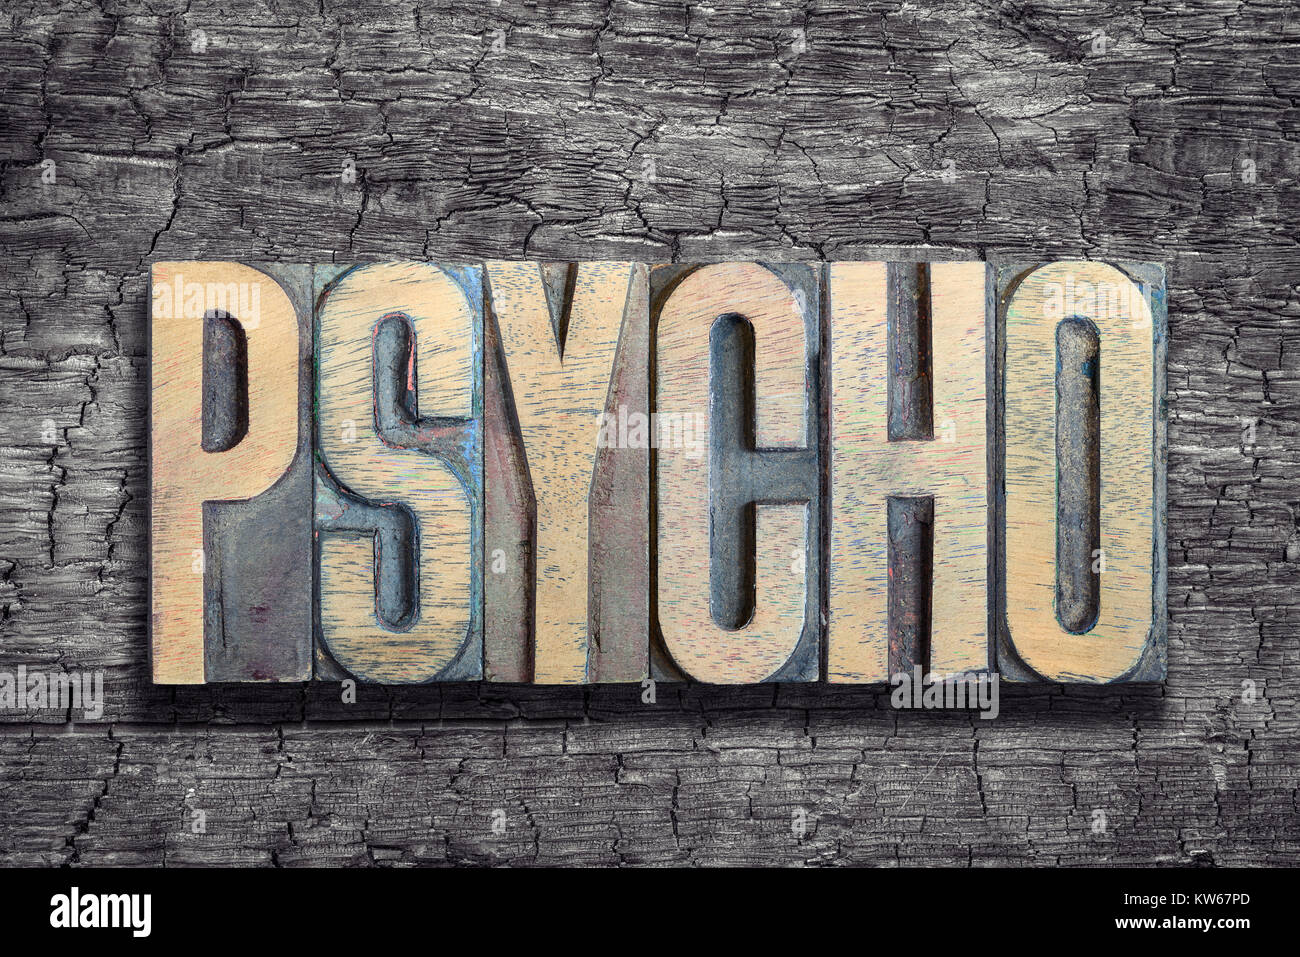 psycho word made from vintage letterpress type on burned wood background Stock Photo